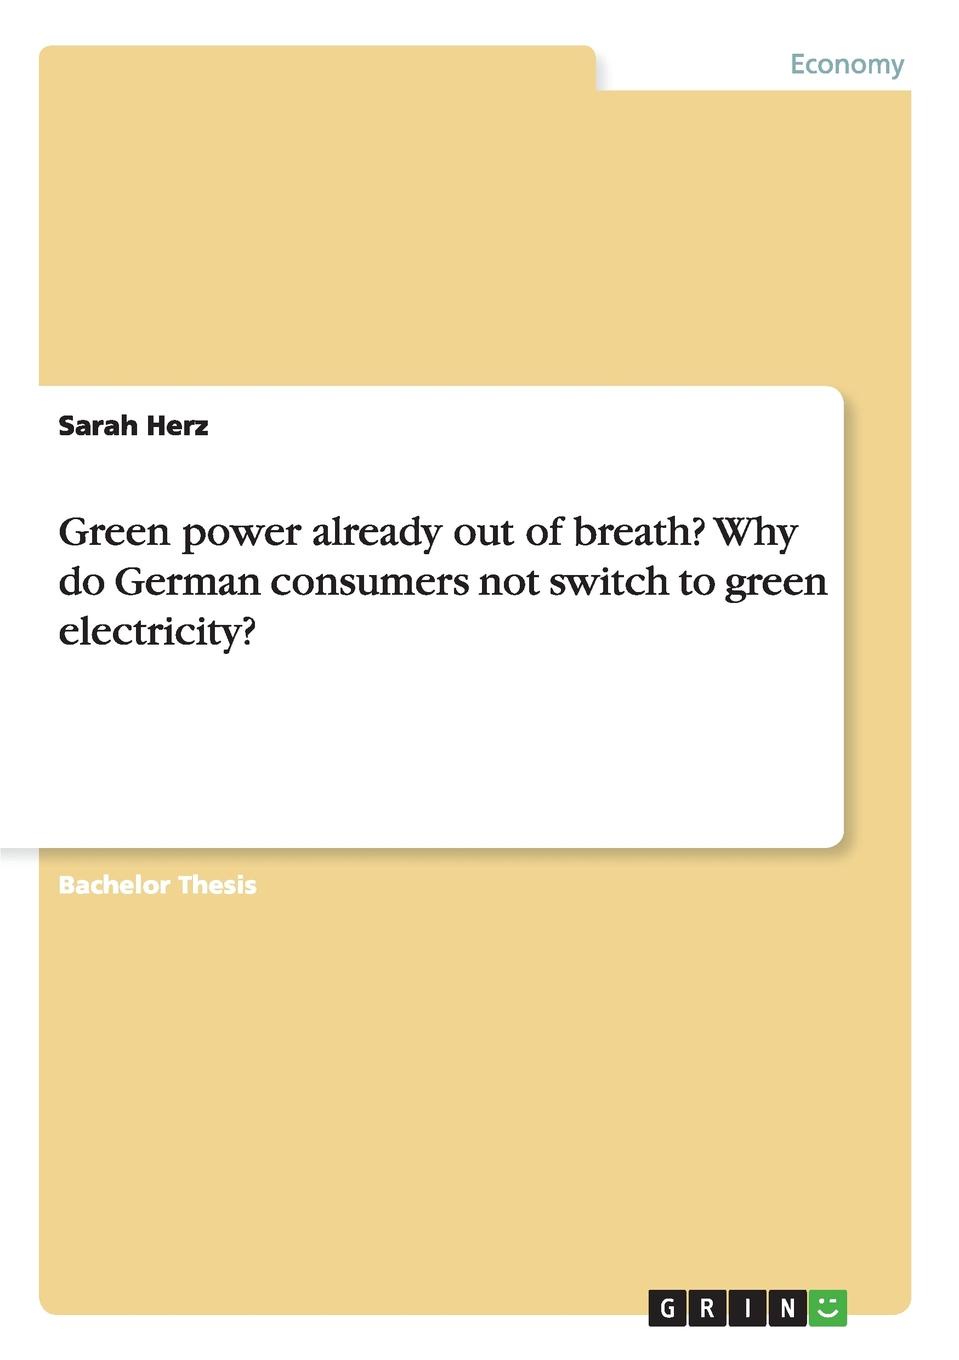 фото Green power already out of breath. Why do German consumers not switch to green electricity.